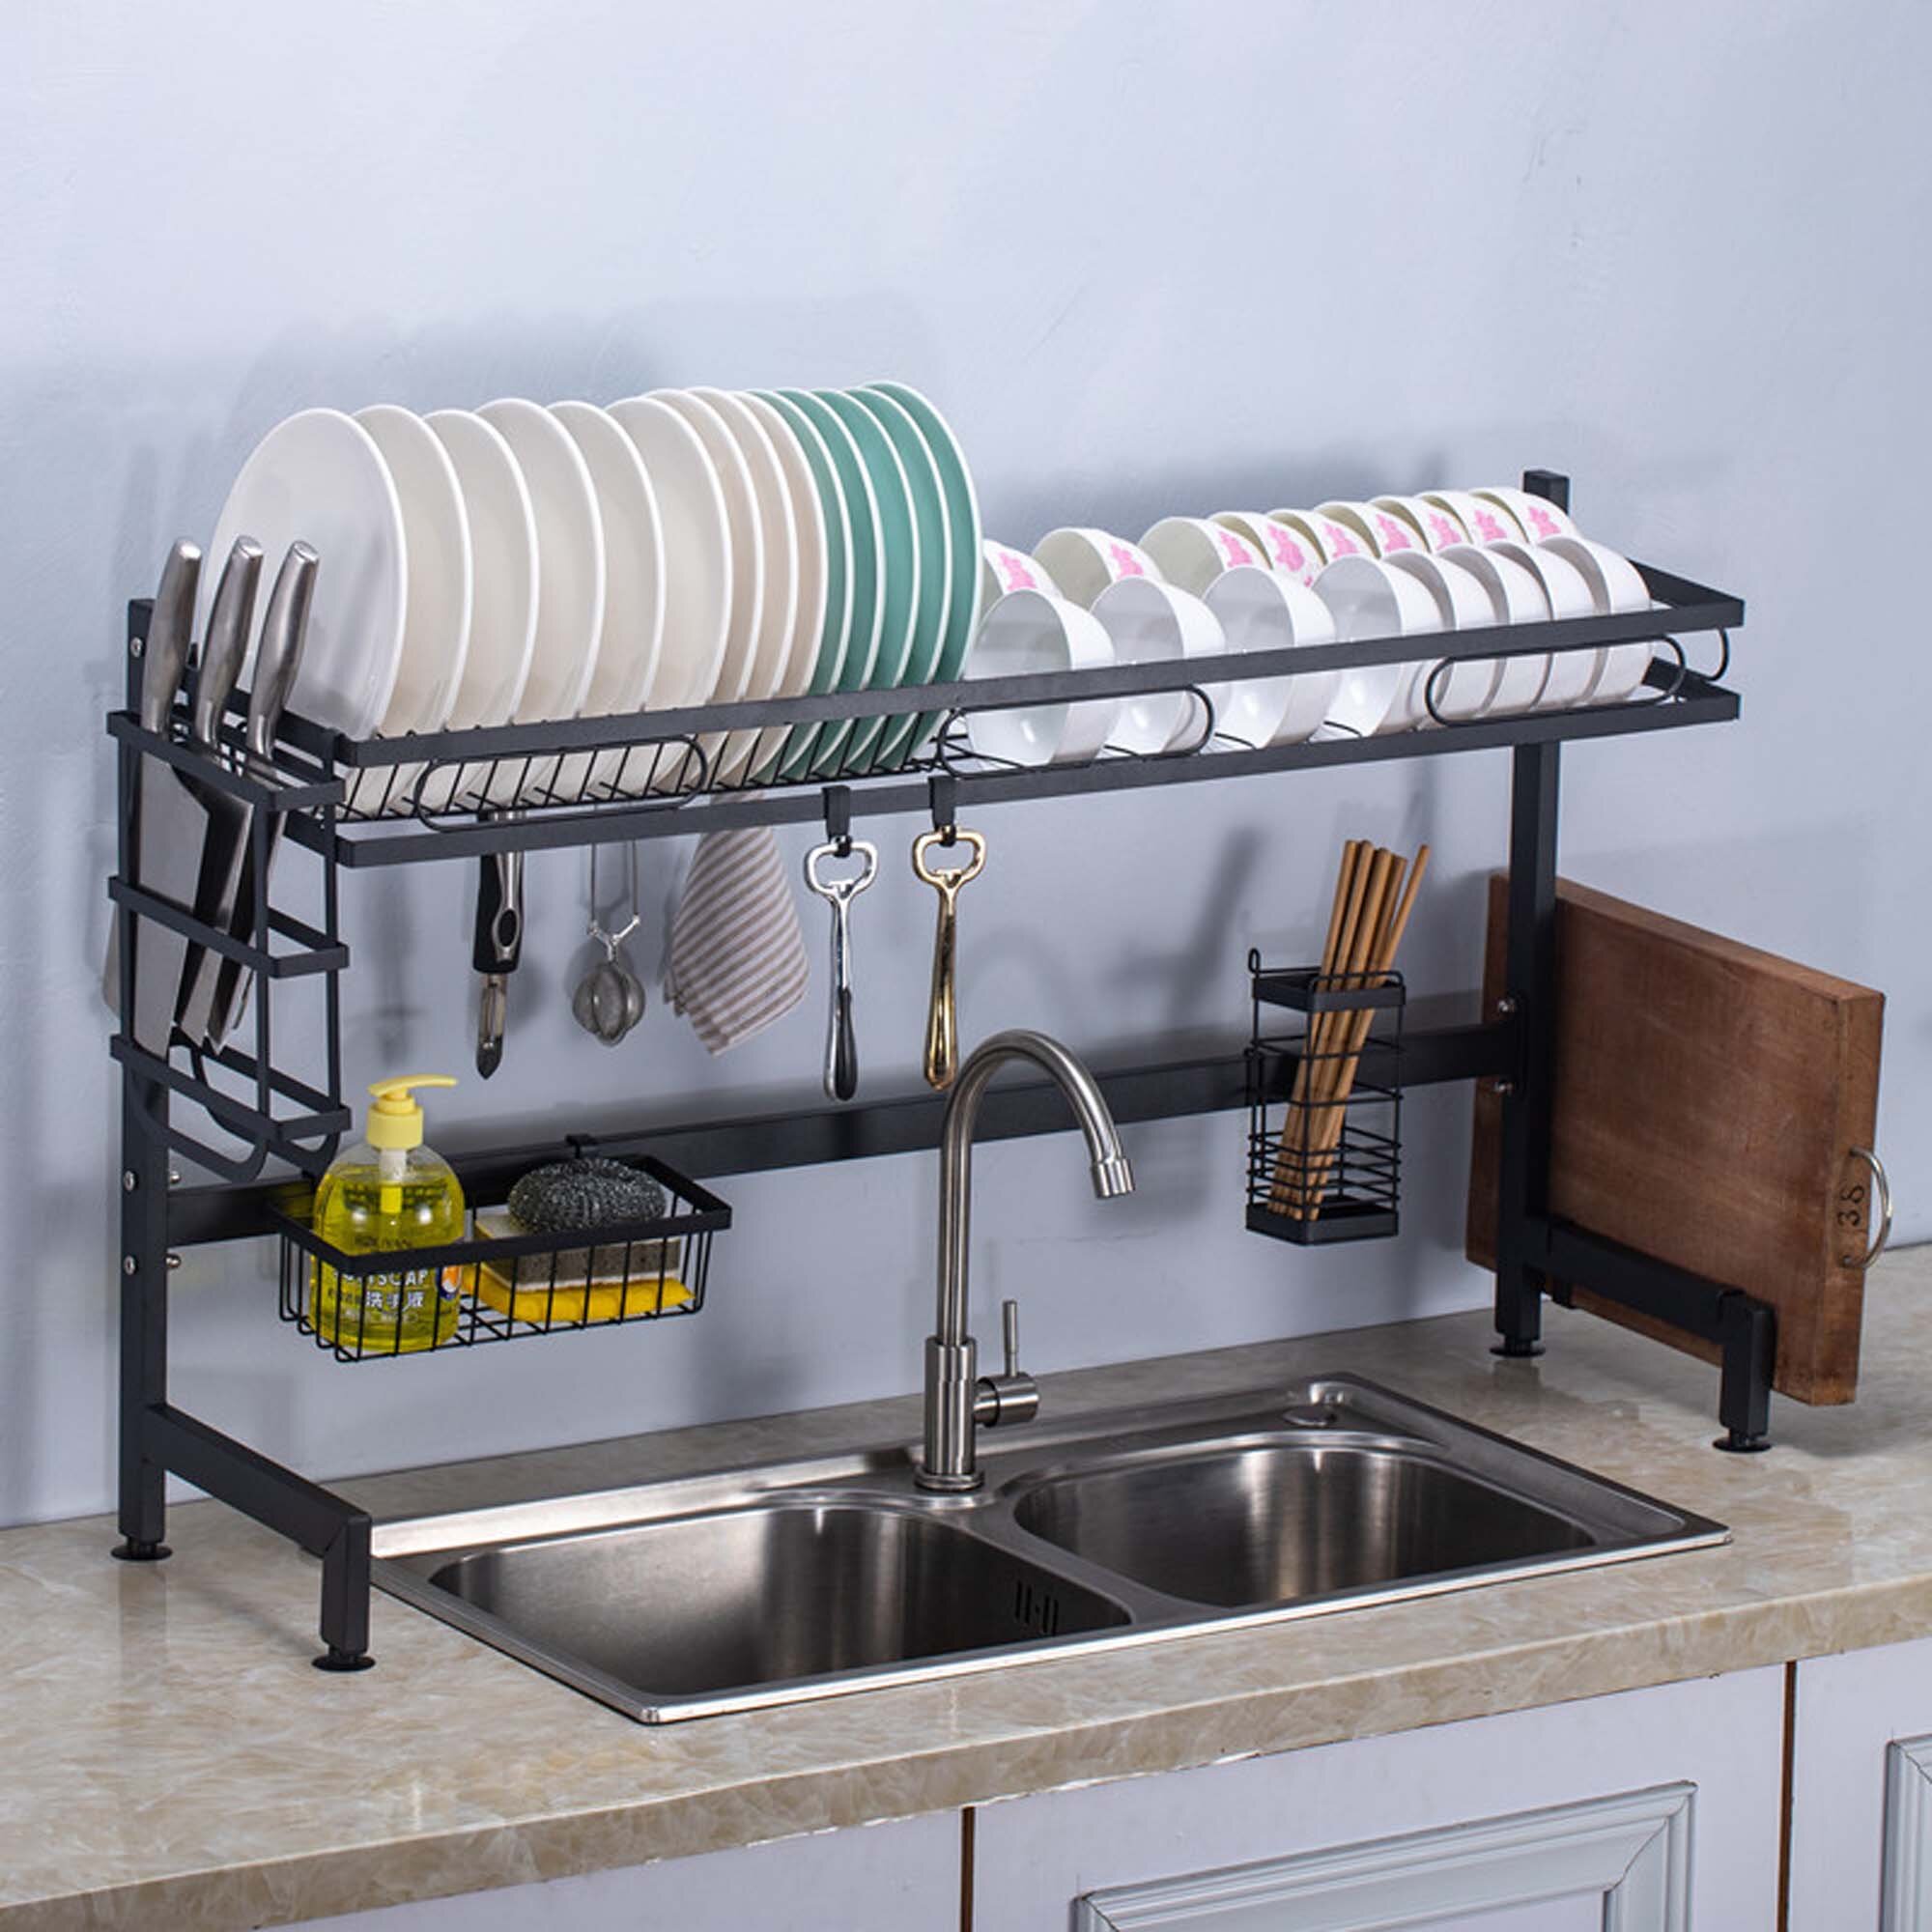 8 Over-The-Sink Dish Racks That Reviewers Love - Living in a shoebox